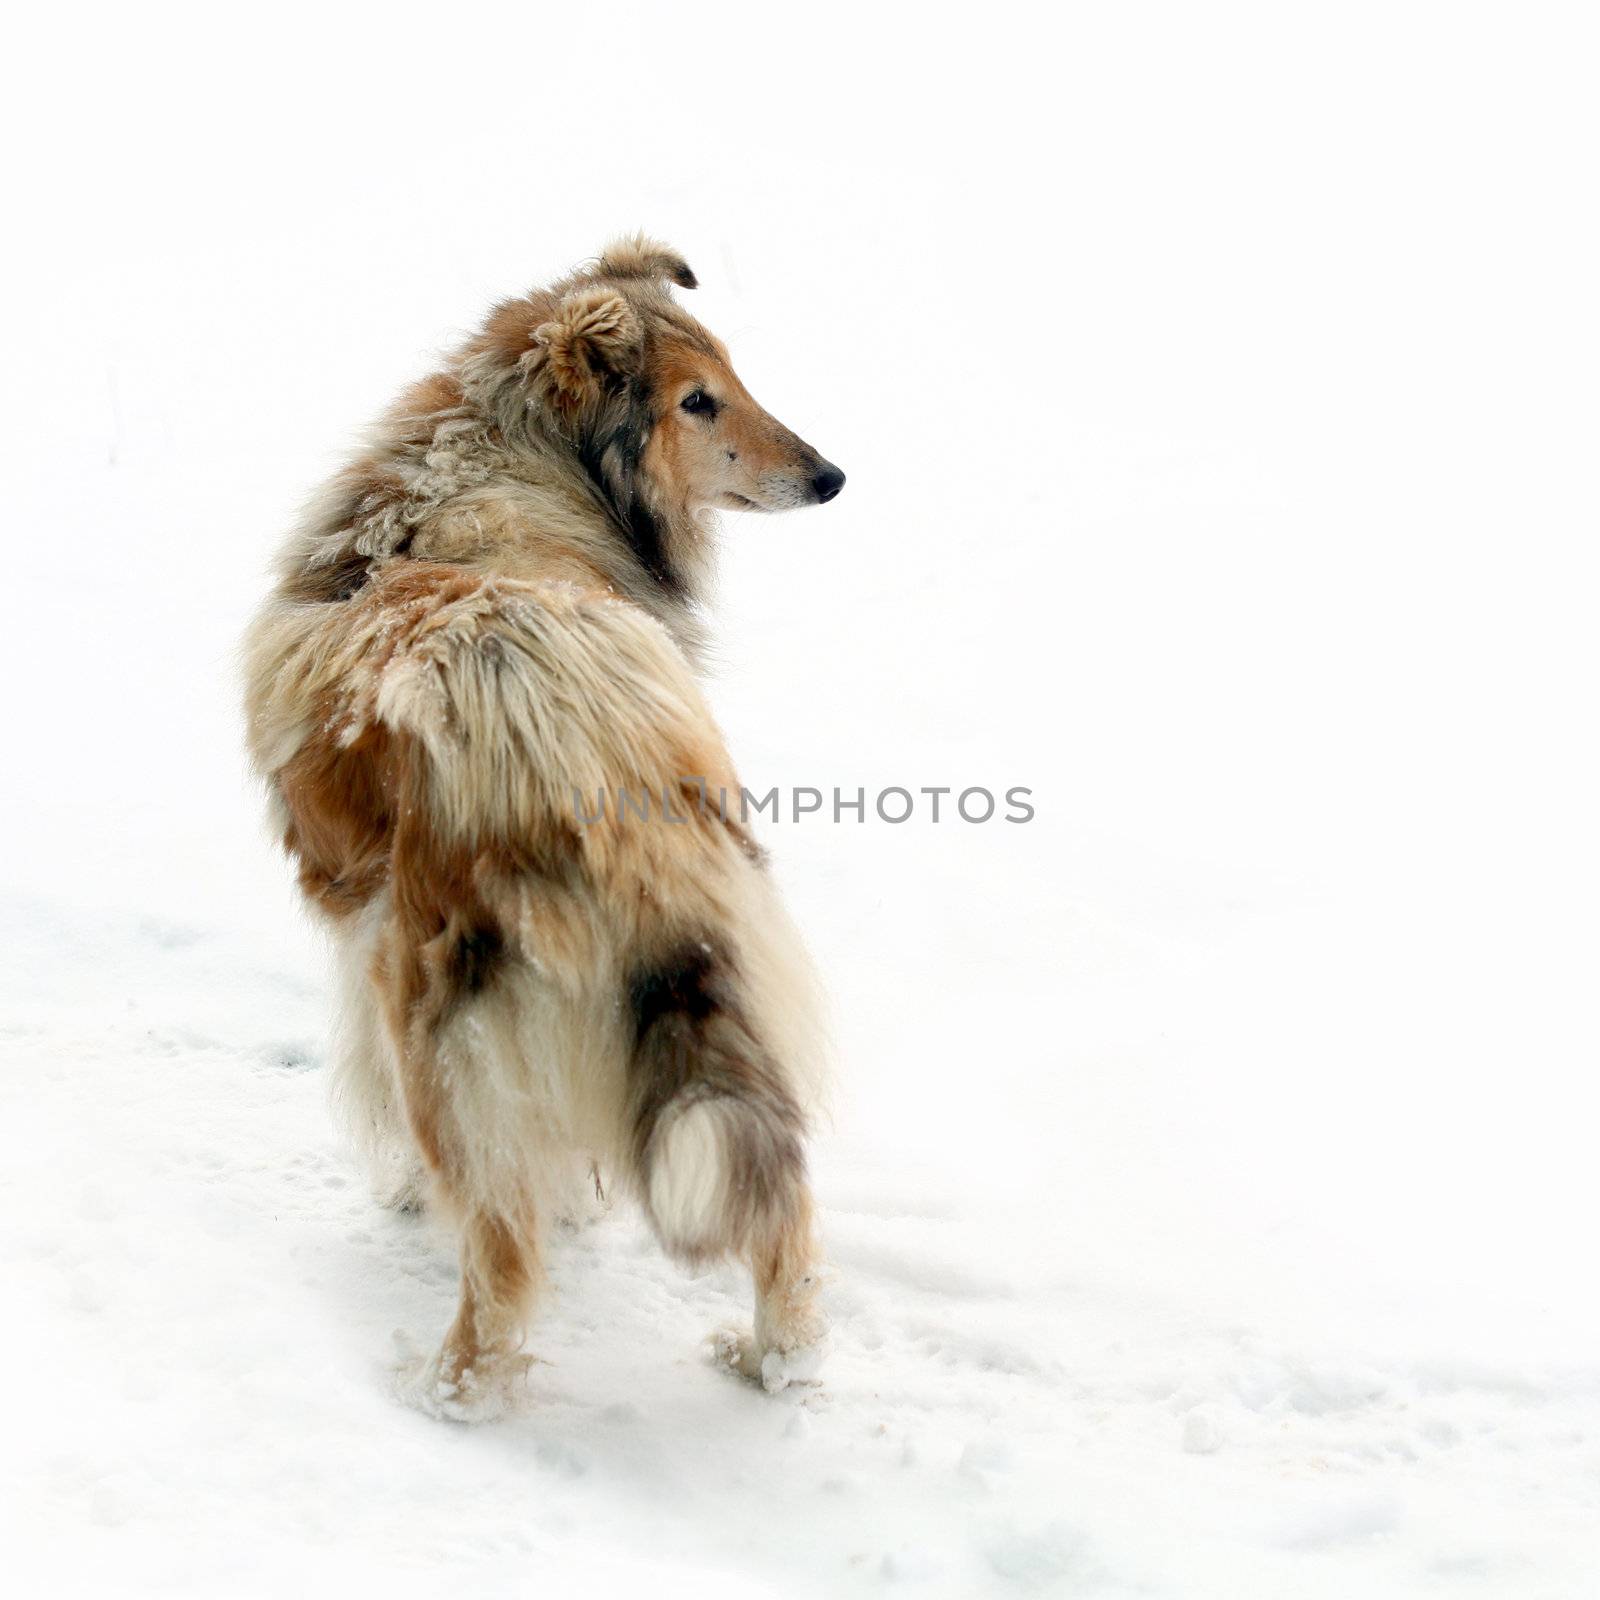 An image of a fluffy dog on white background